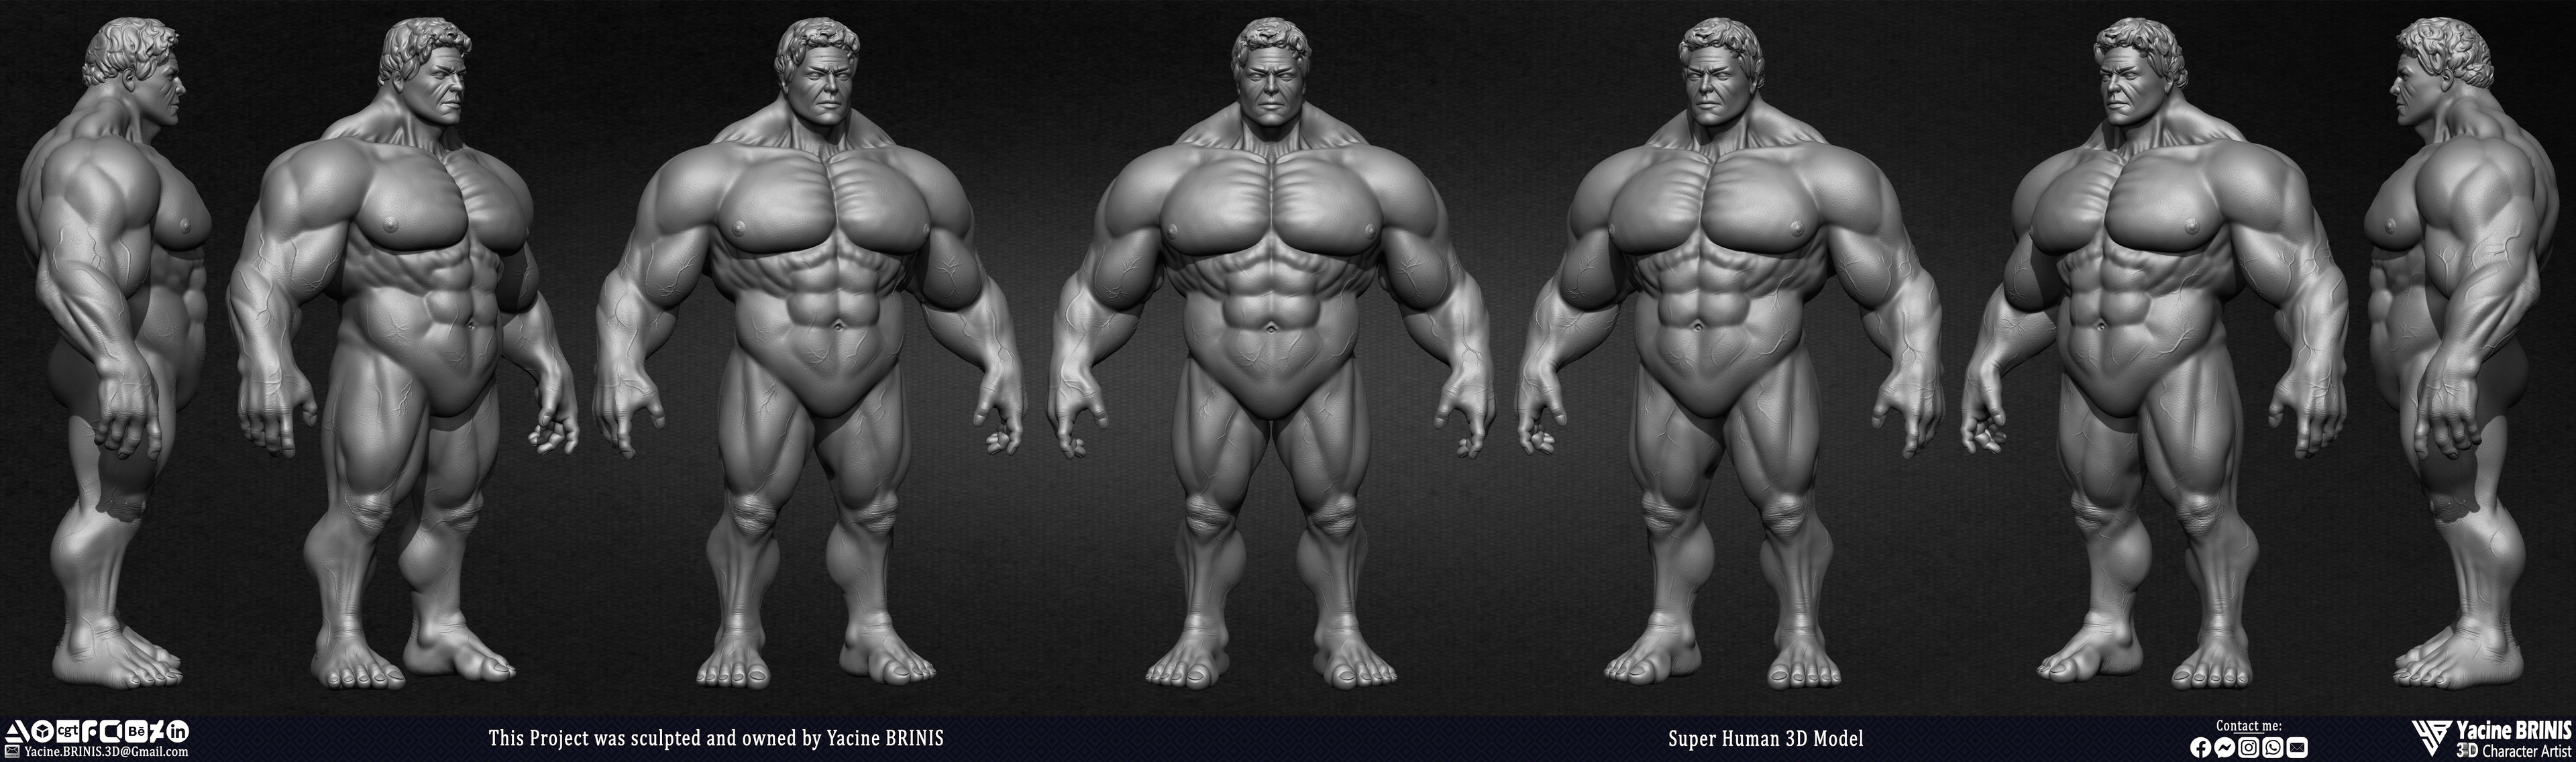 Super Human 3D Model sculpted by Yacine BRINIS 003